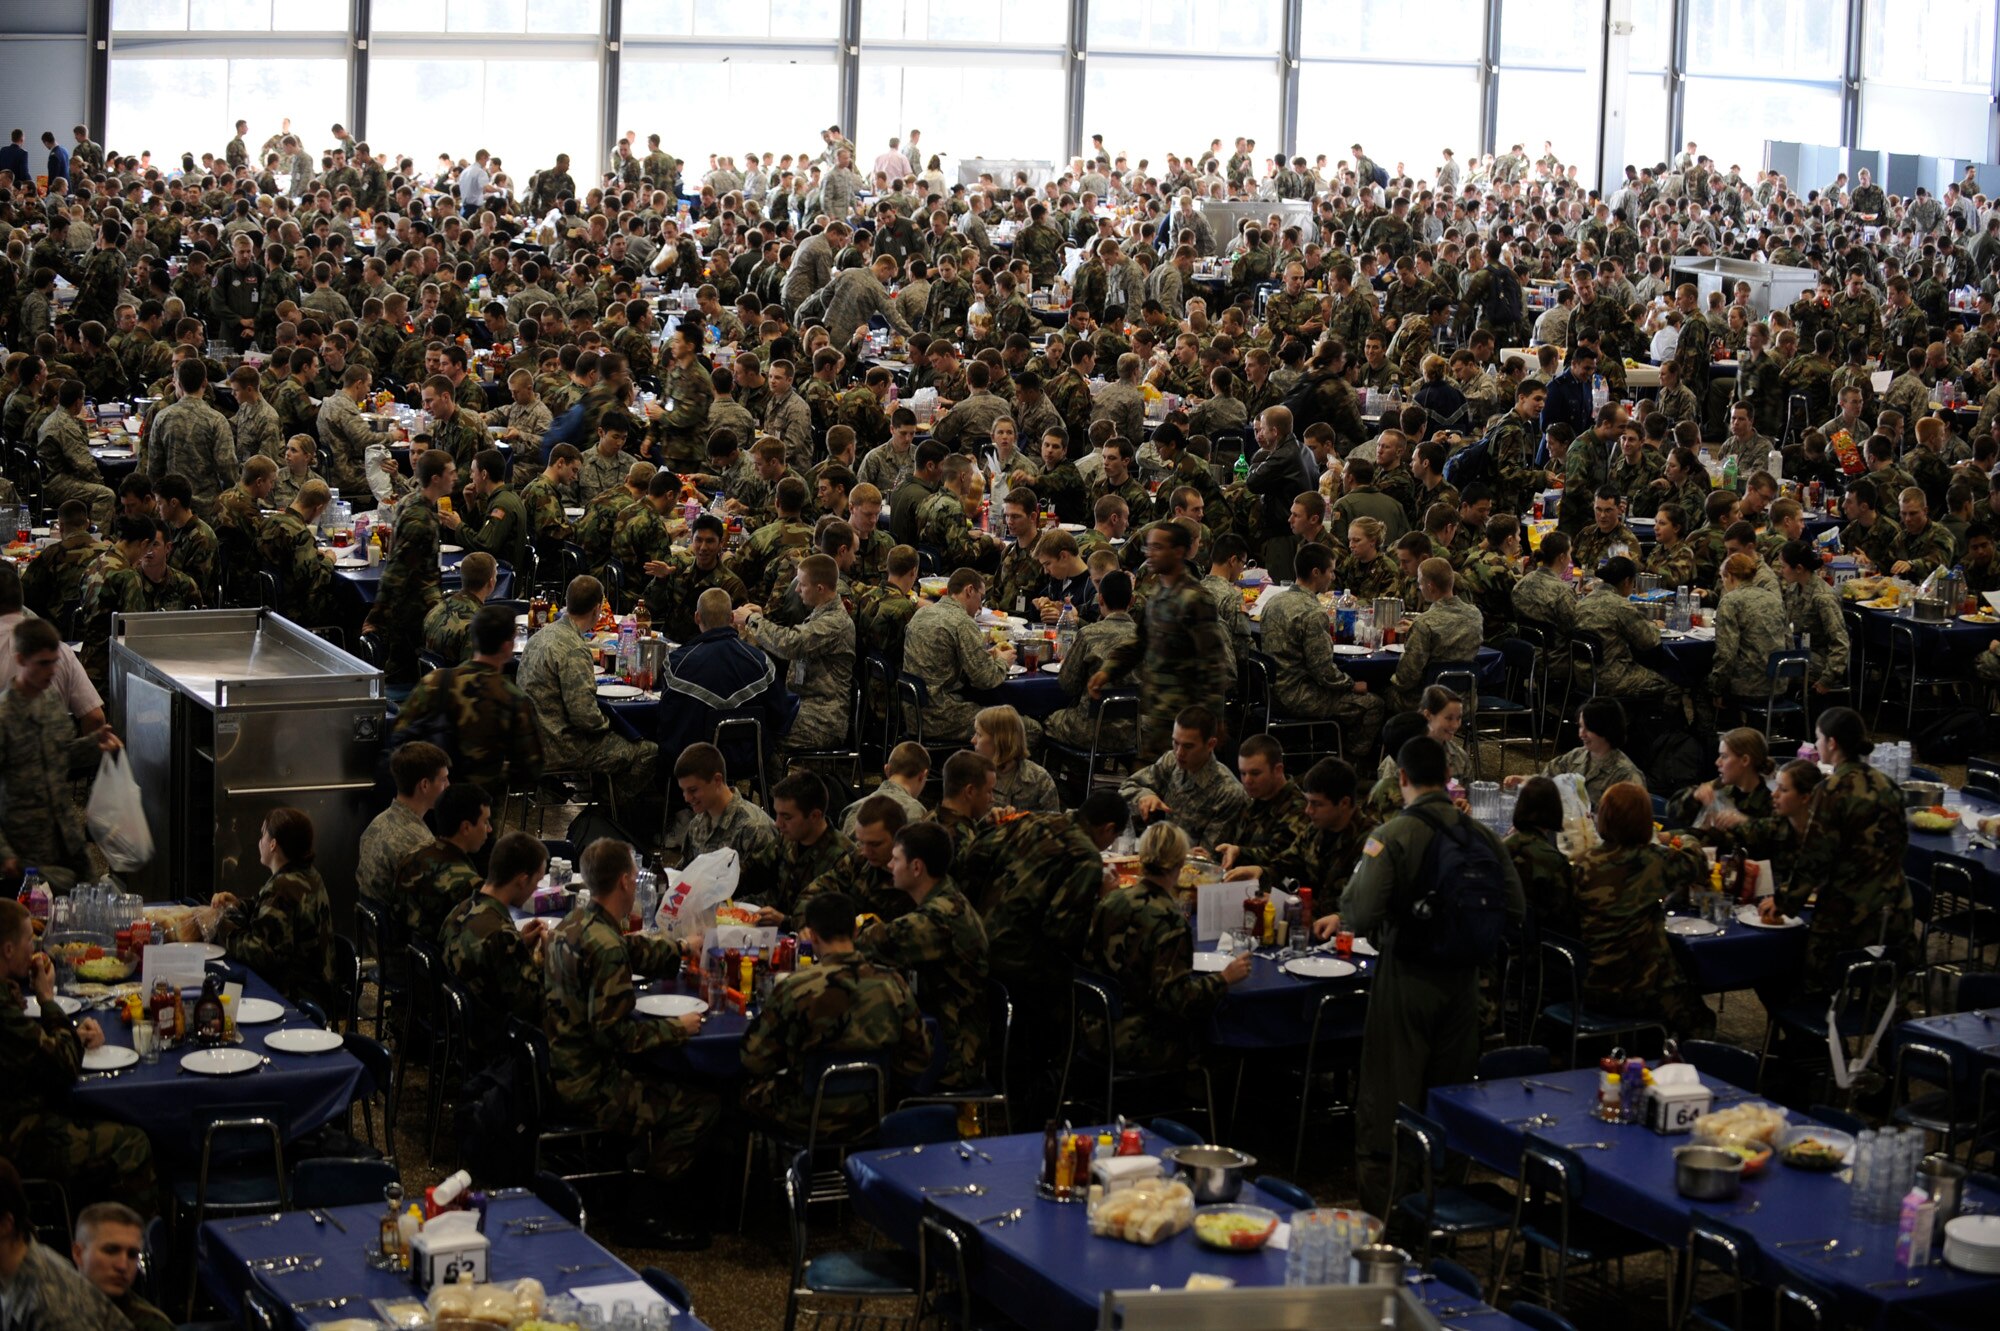 Cadets eat lunch Jan. 23 at Mitchell Hall Cadet Dining Facility at the U.S. Air Force Academy in Colorado Springs, Colo. The dining facility feeds approximately 4450 cadets and sits on 1.75 acres. (U.S Air Force photo/Staff Sgt. Desiree N. Palacios)